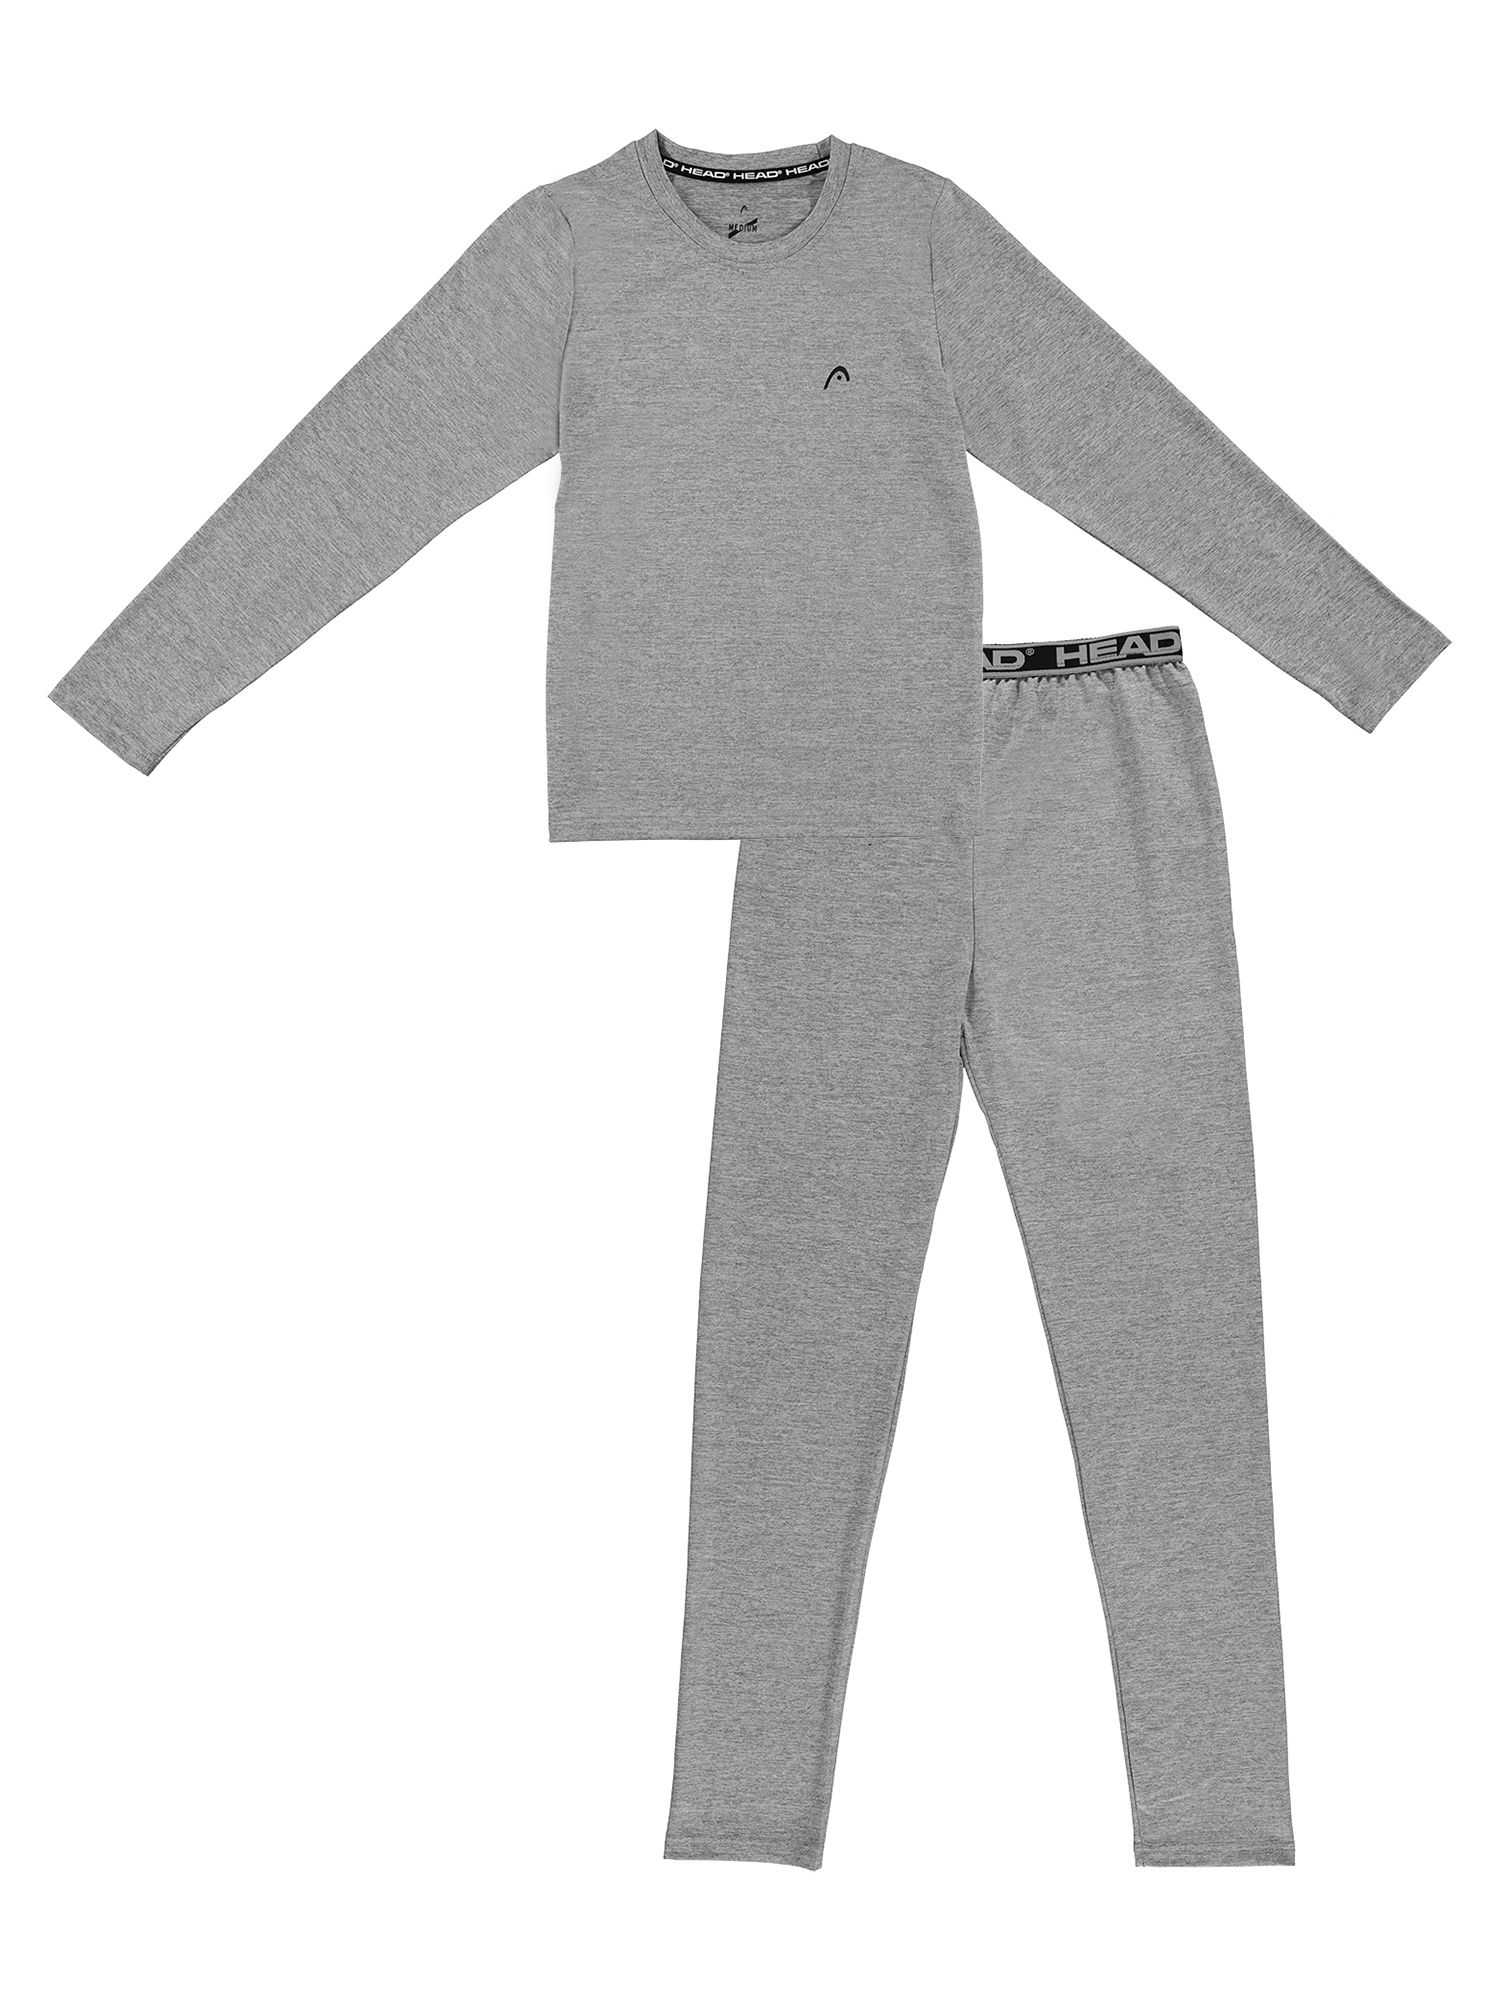 HEAD, Boys Thermal Underwear, 2 Piece Base Layer Set Sizes 6 - 18 - image 1 of 2